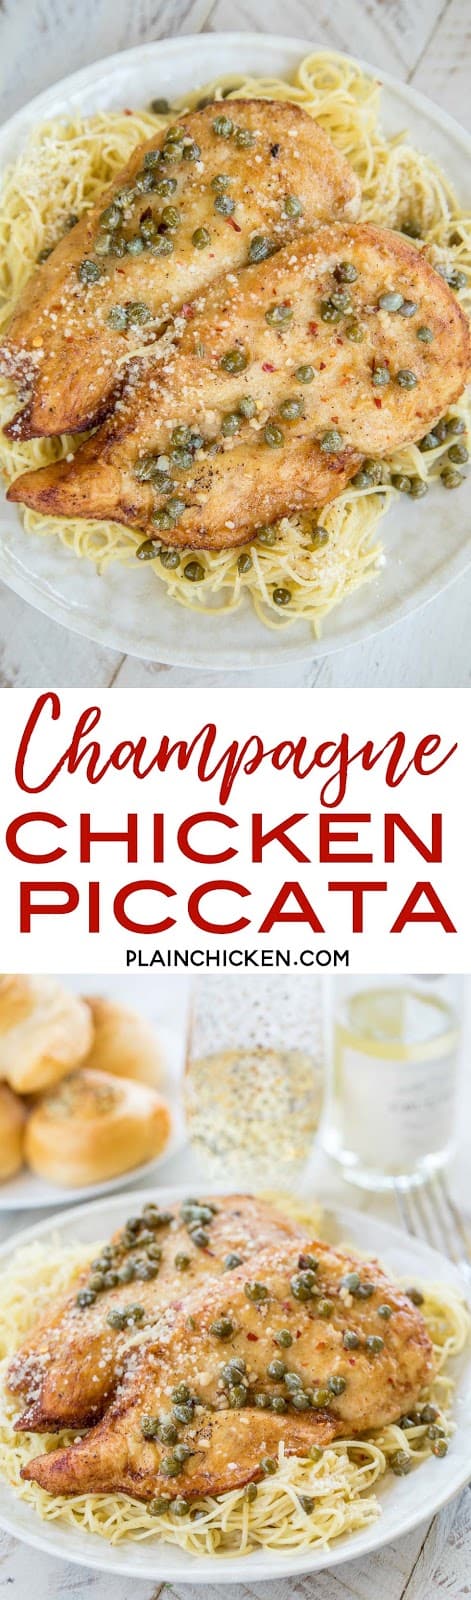 Champagne Chicken Piccata - no one will ever guess how easy this is! With a few simple ingredients you can make a restaurant quality meal! Chicken, garlic, butter, lemon, champagne and capers. Ready in about 10 minutes! This is the most requested chicken dish in our house! #chicken #easychickenrecipe #chickendinner